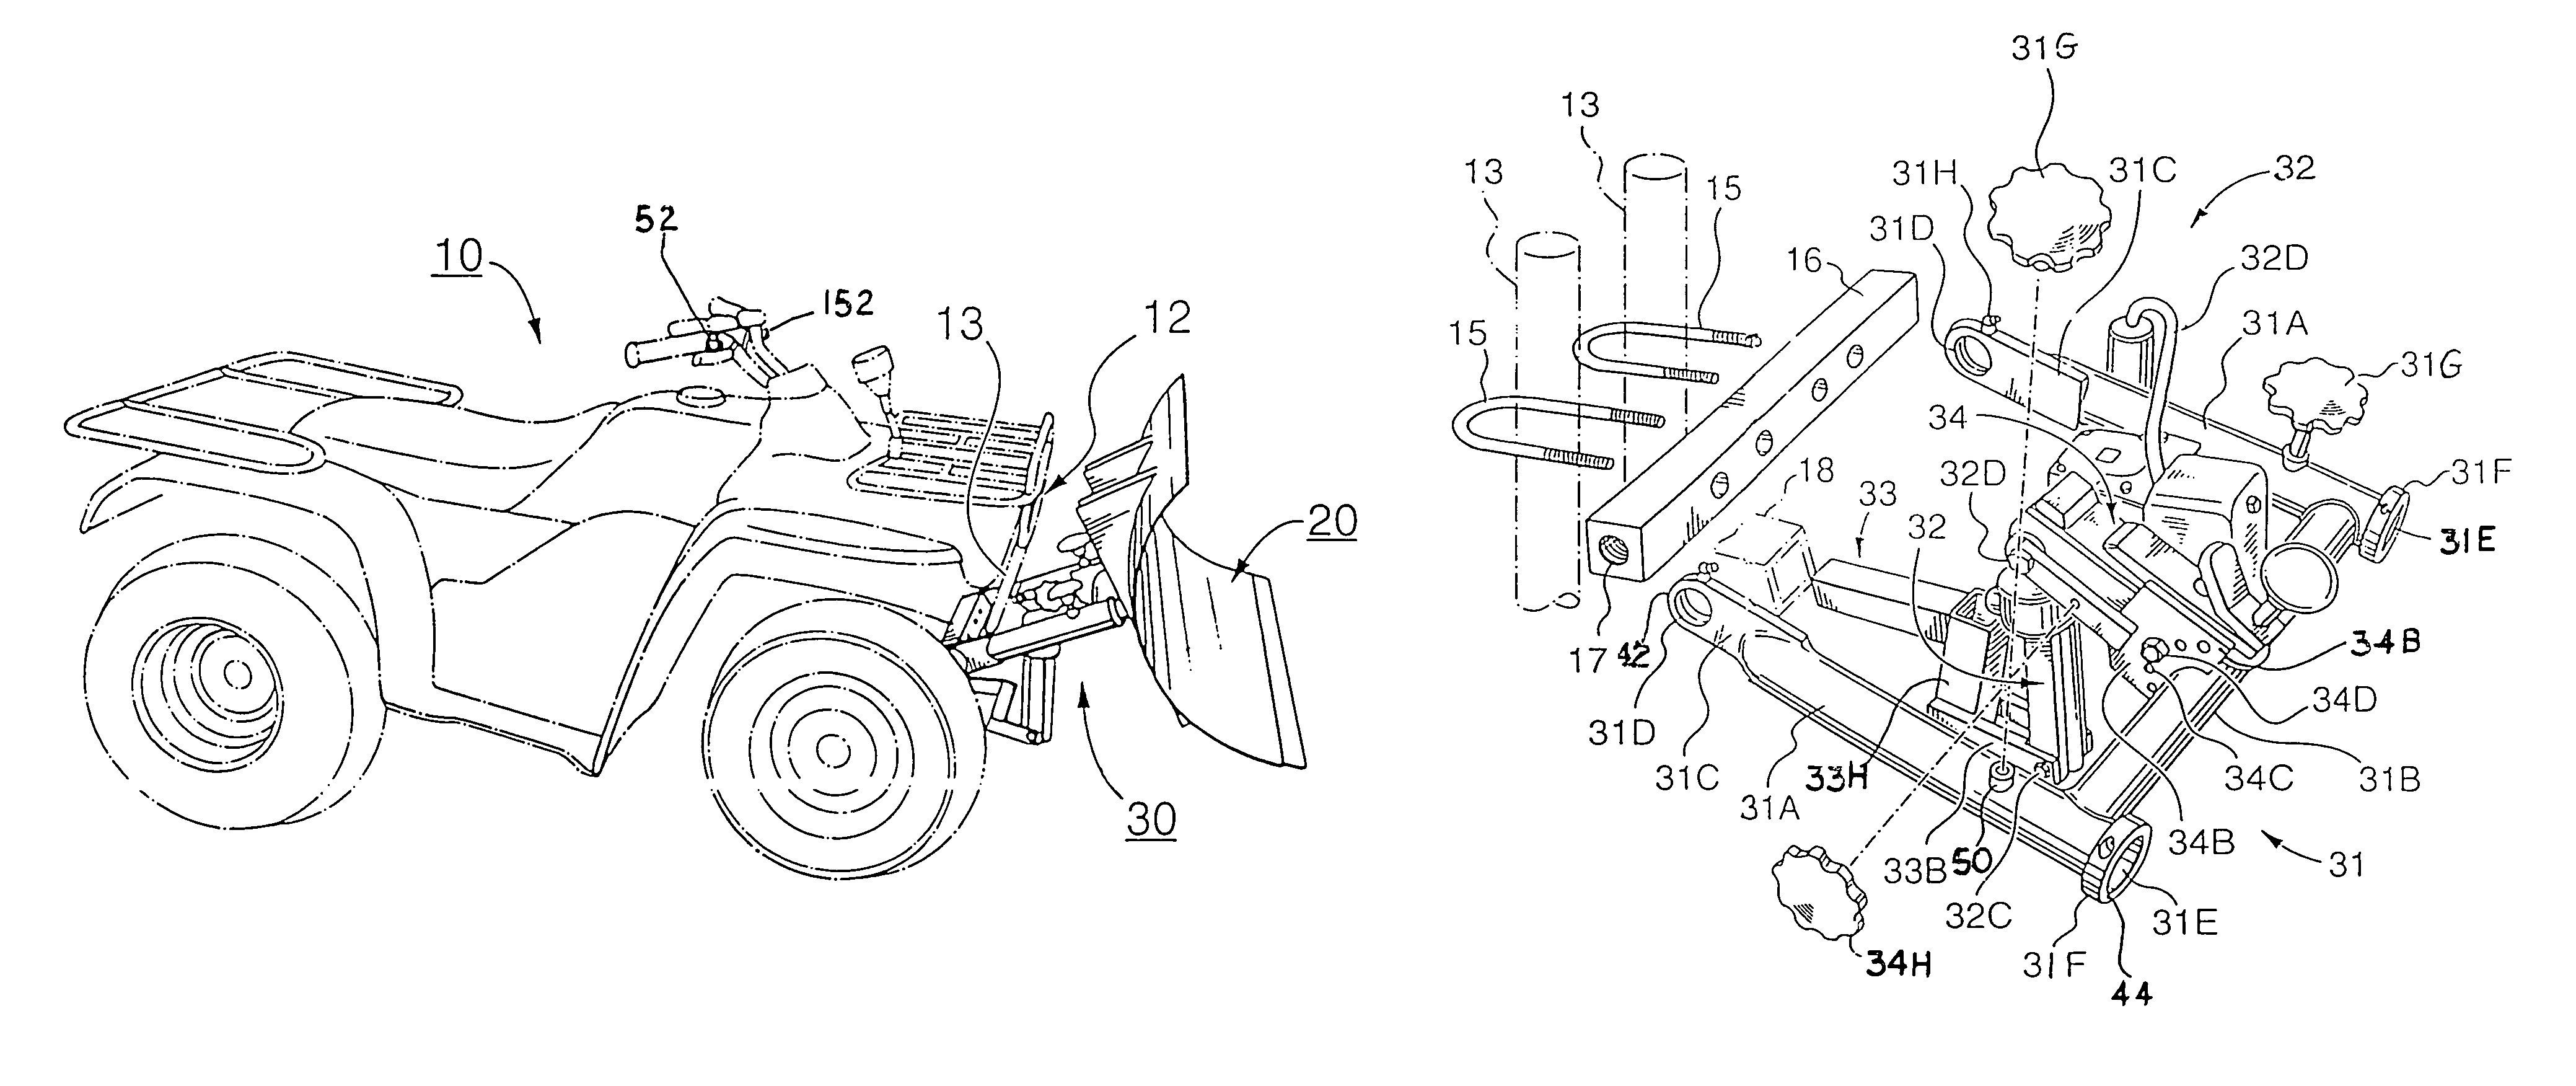 Vehicle front-end quick connect hitch and lift assembly